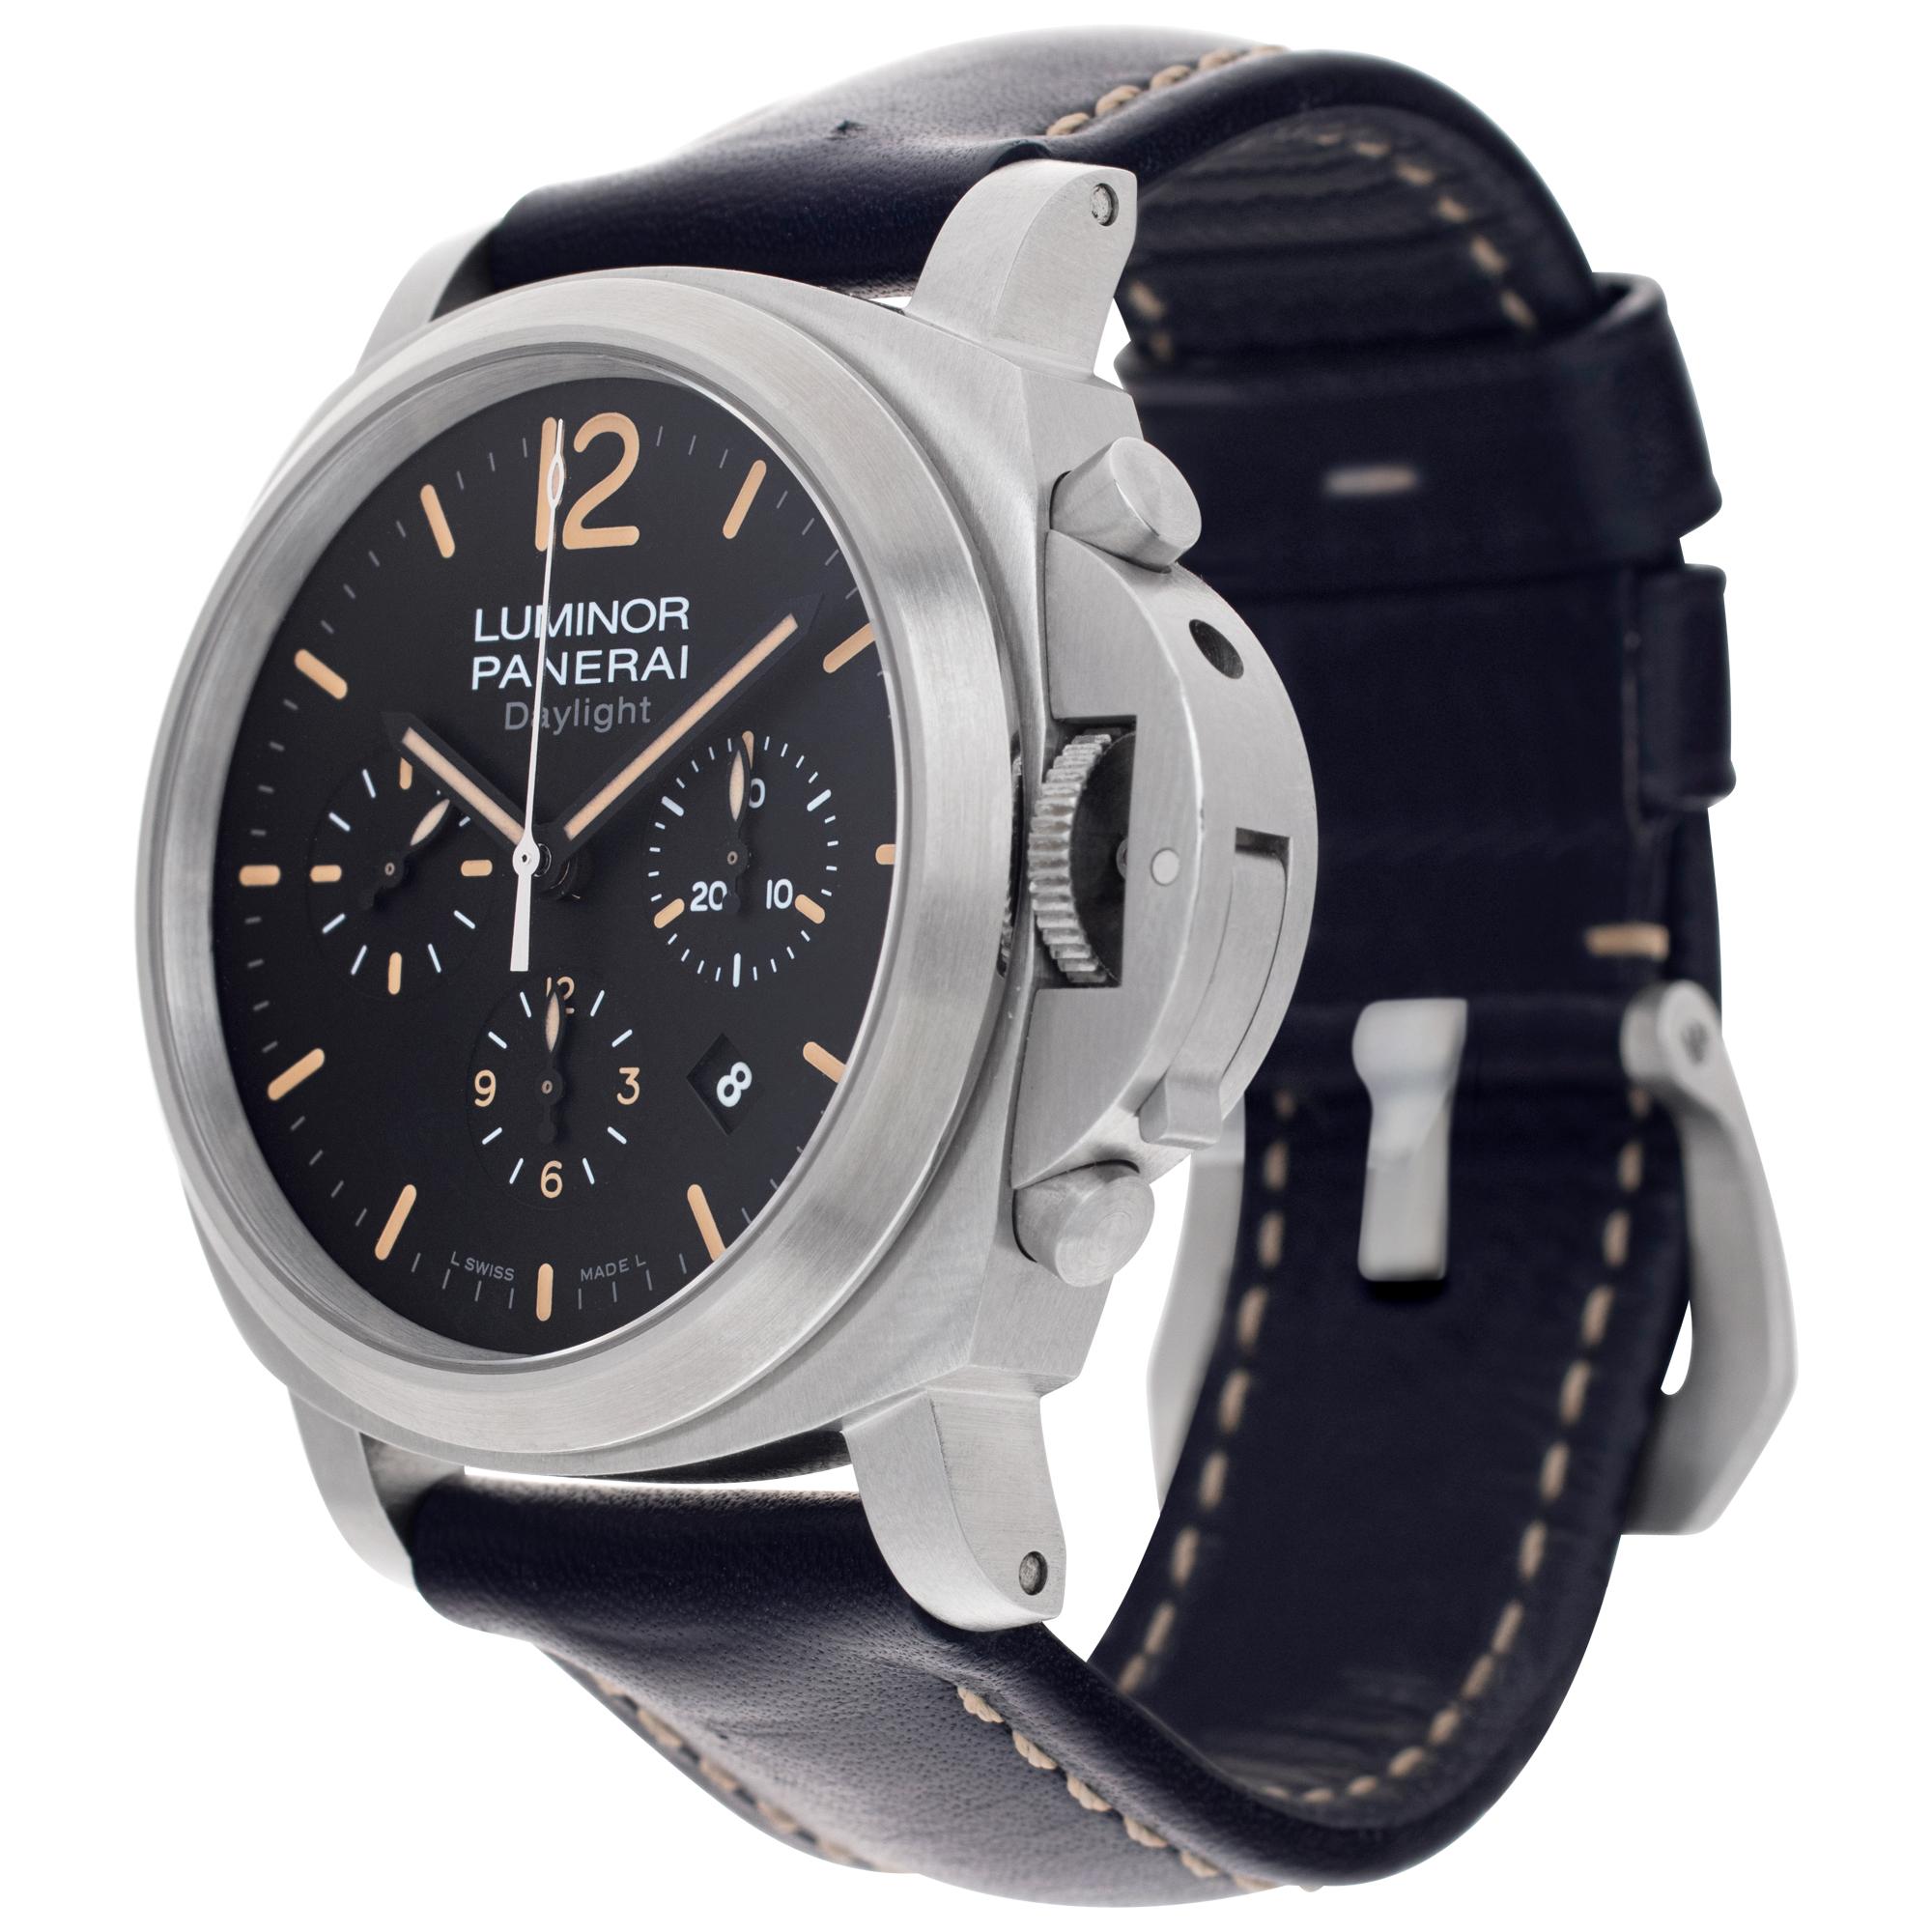 Panerai Luminor Daylight in stainless steel on leather strap. Auto w/ subseconds, date and chronograph. 44 mm case size. Full set with box and papers dated 2013 - comes with extra rubber strap. Ref PAM00356. Fine Pre-owned Panerai Watch.

Certified